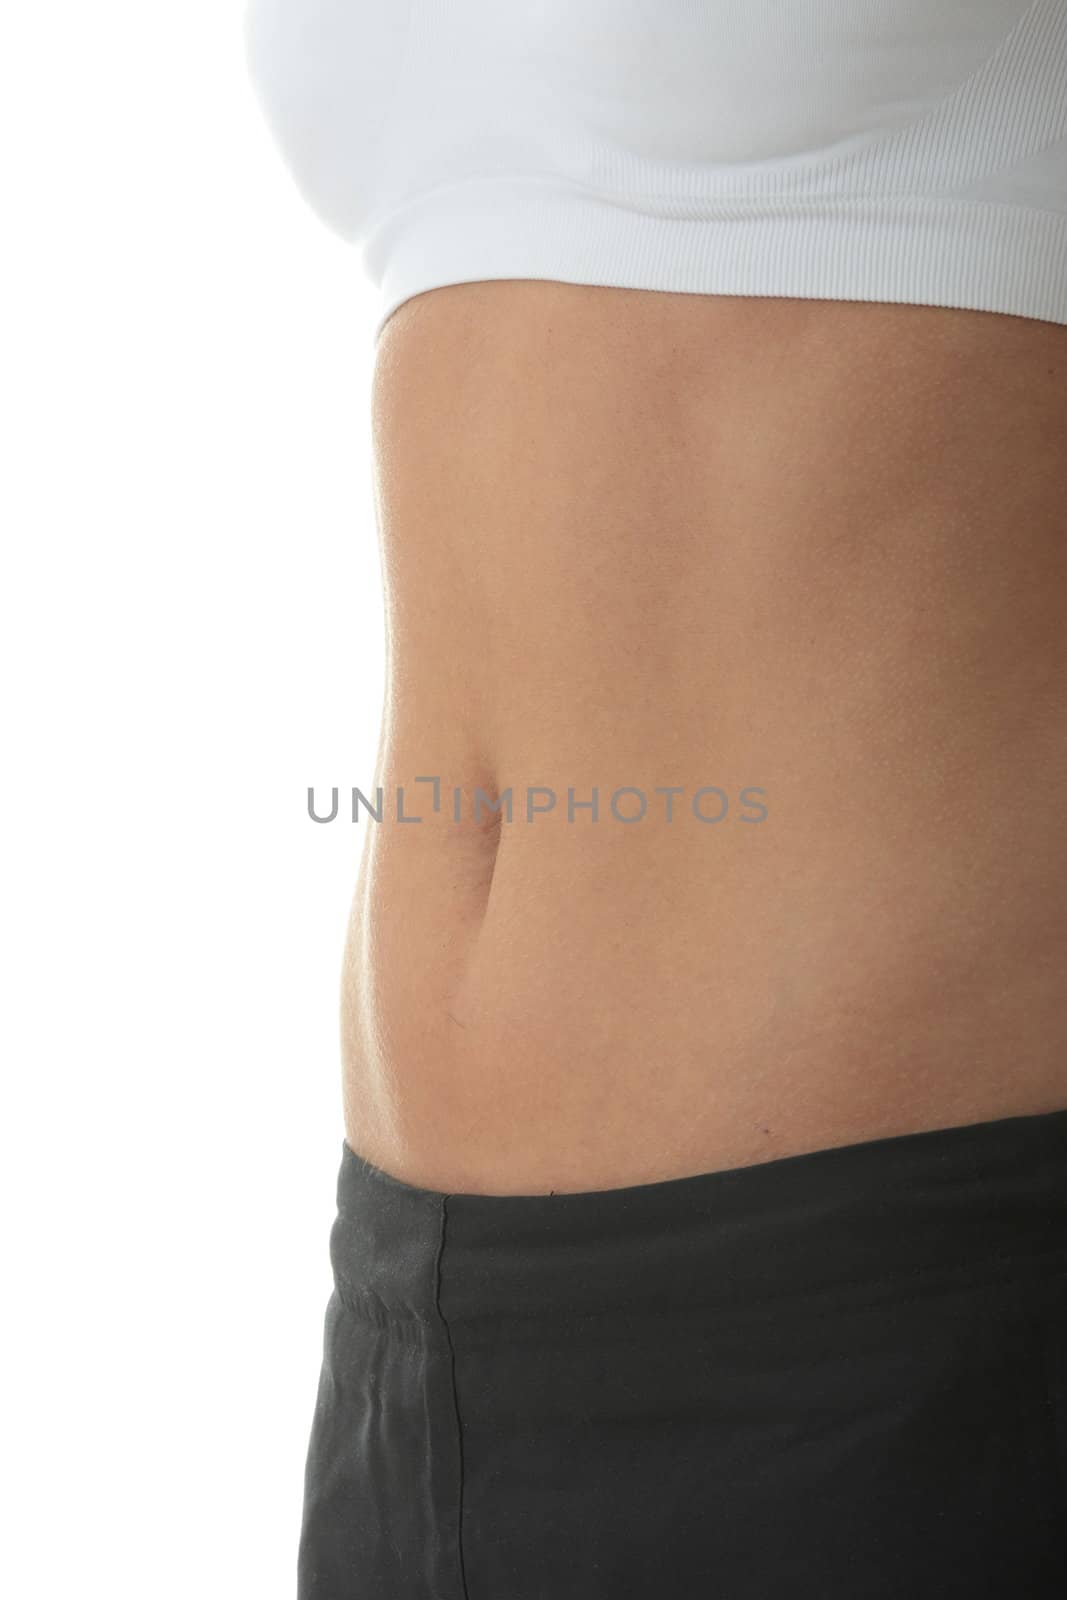 Midsection of a physically fit young woman by BDS